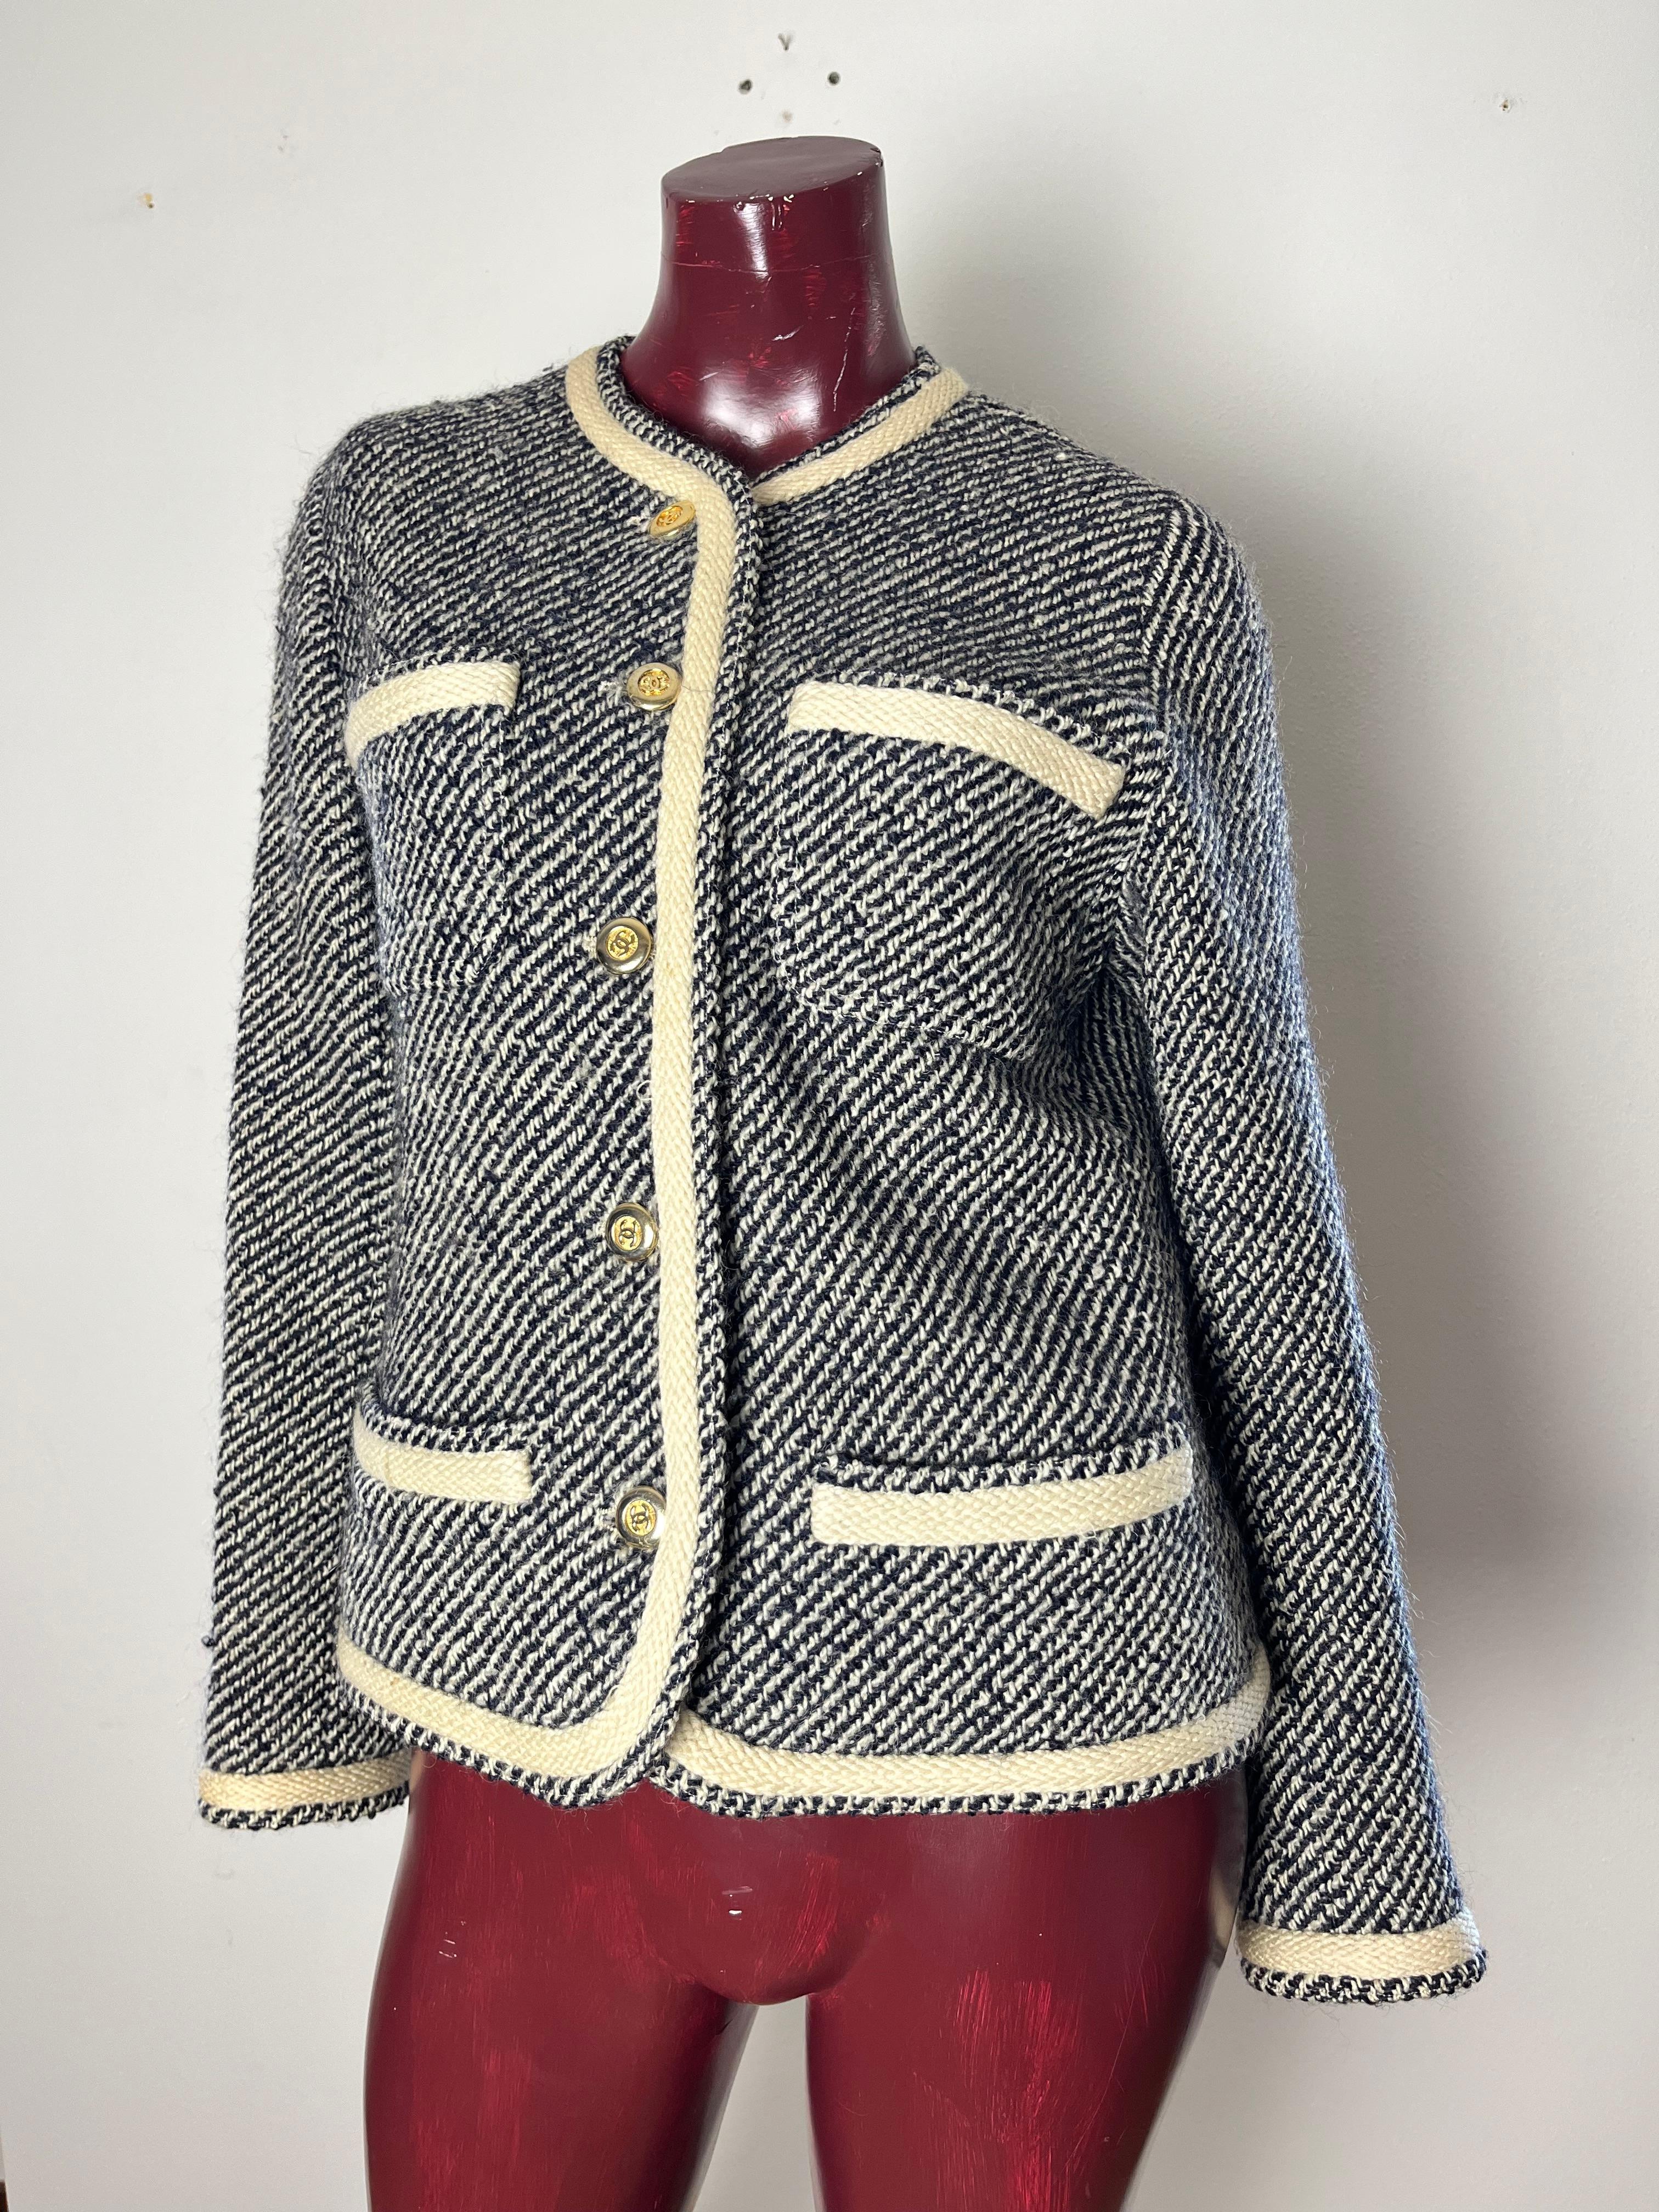 beautiful classic chanel jacket in black/cream tweed round neck 4 pockets .
pocket edging , collar , buttoning , jacket outline  and cream-colored wool sleeves
gold chanel logo buttons 5 on front and 4 on each sleeve 

SIZE 40 ITALIAN

THE MANNEQUIN